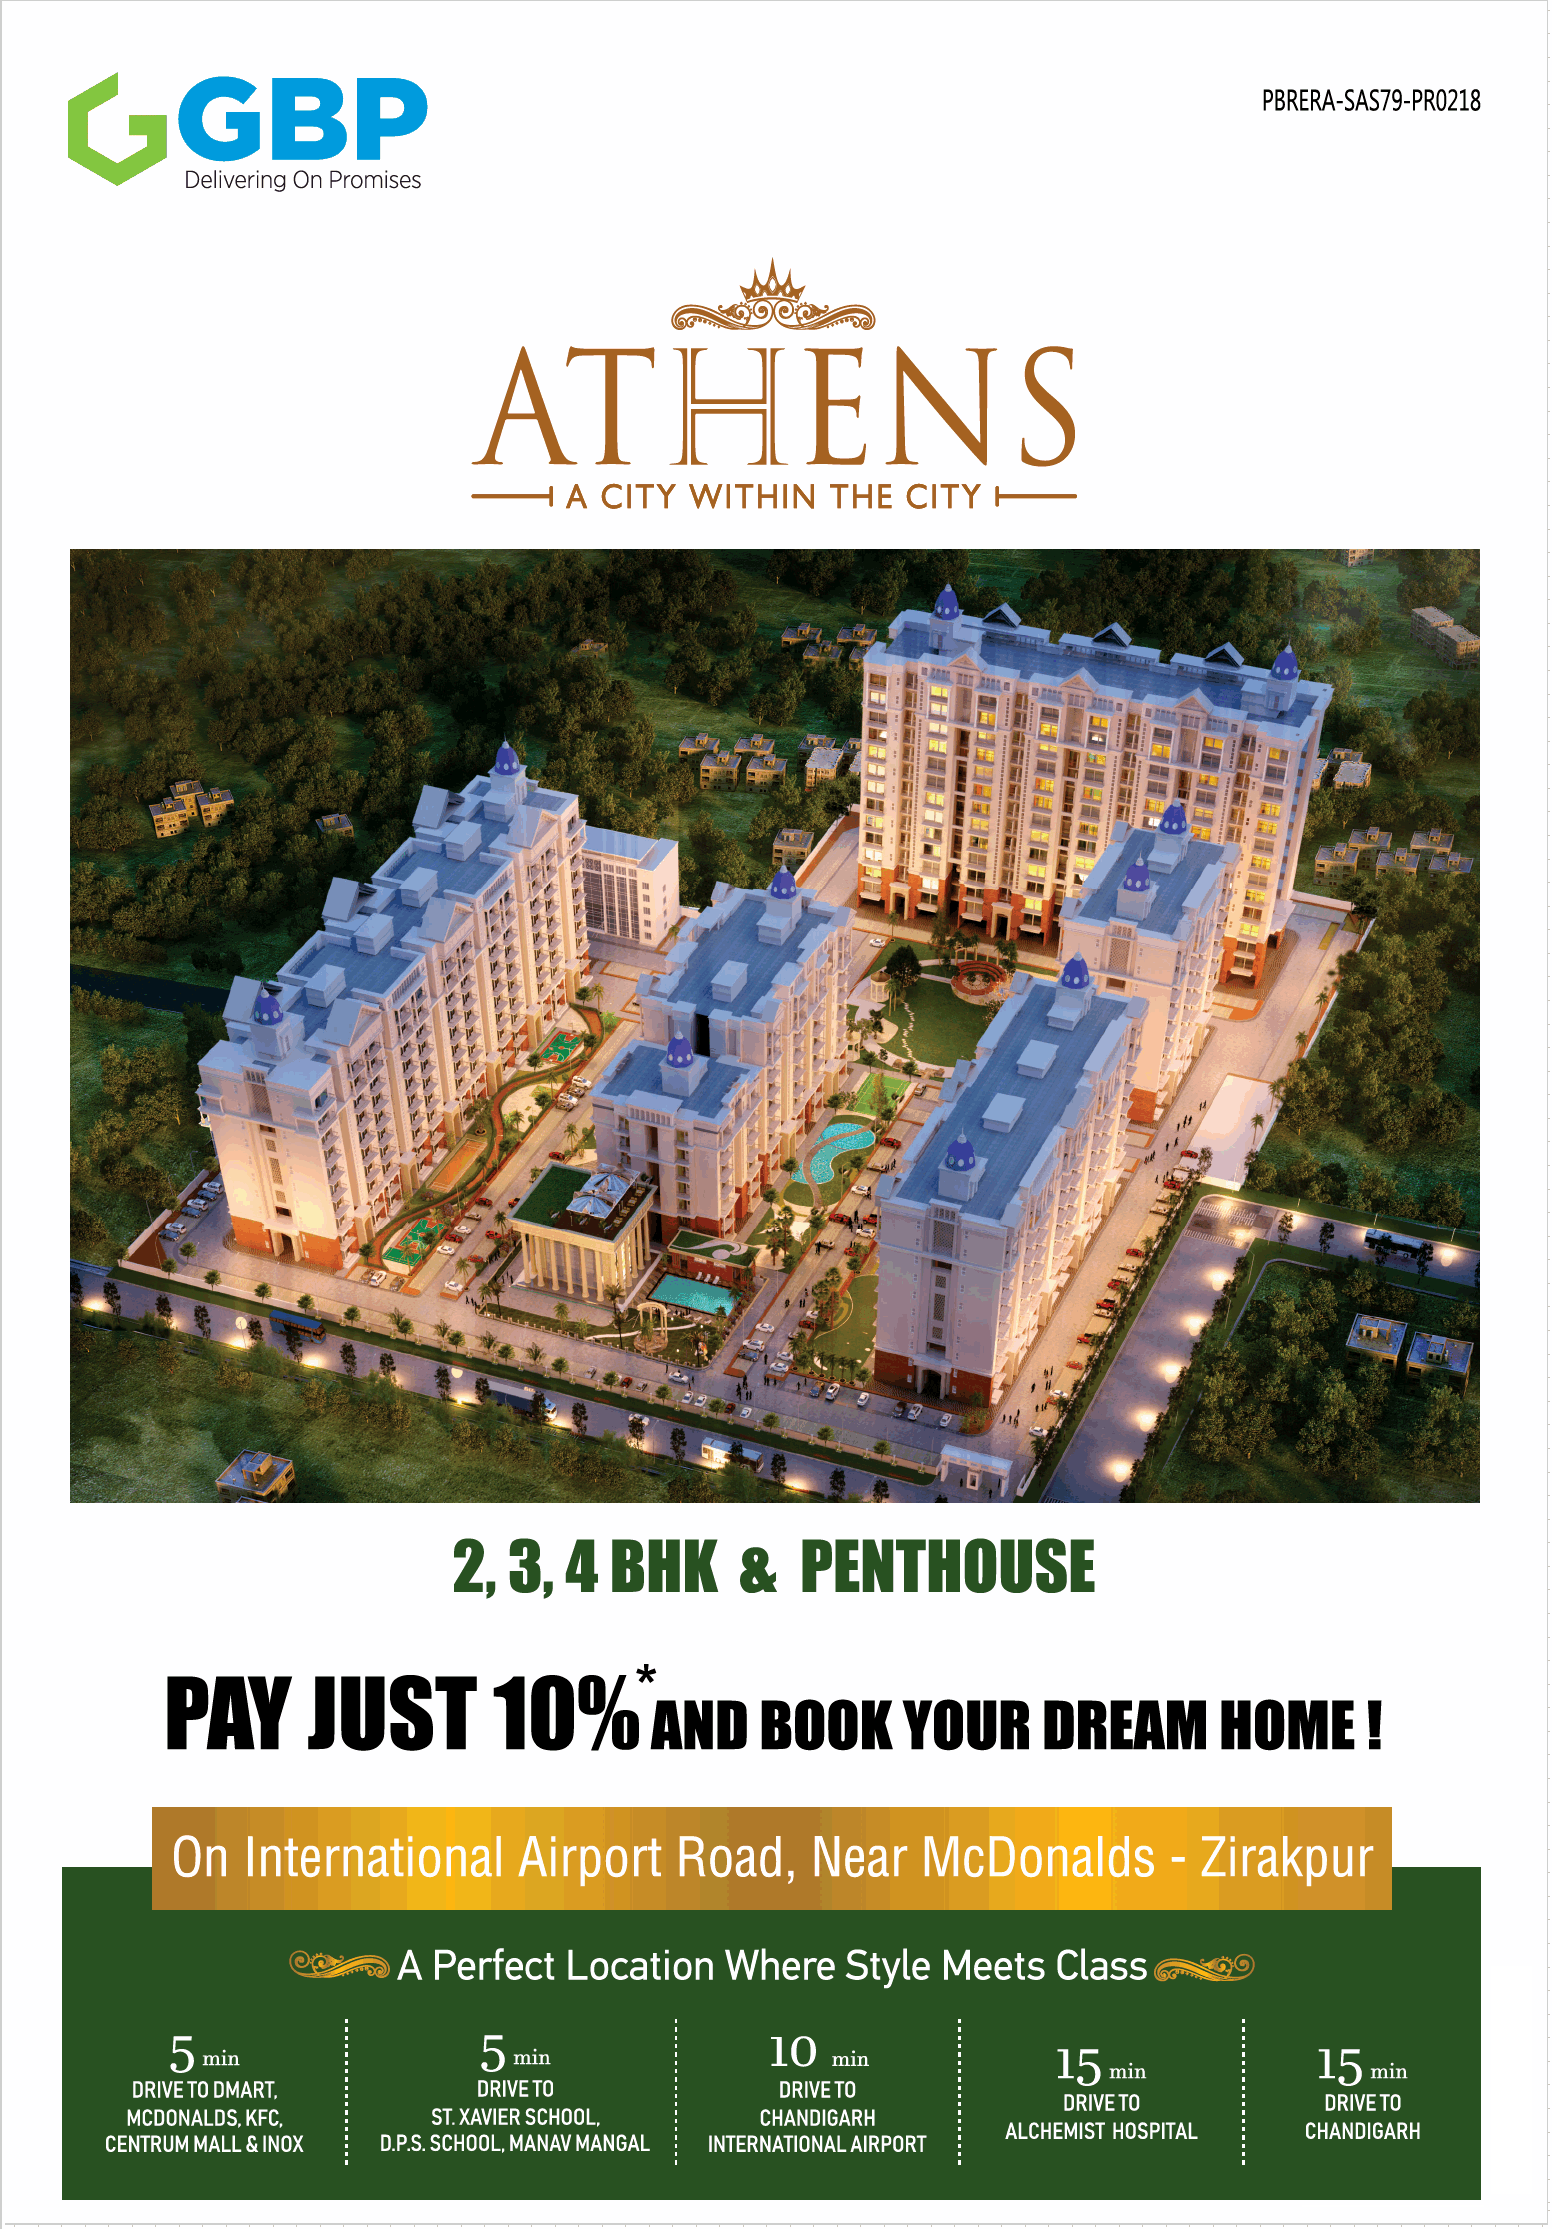 Pay just 10% & book your dream home at GBP Athens in Chandigarh Update